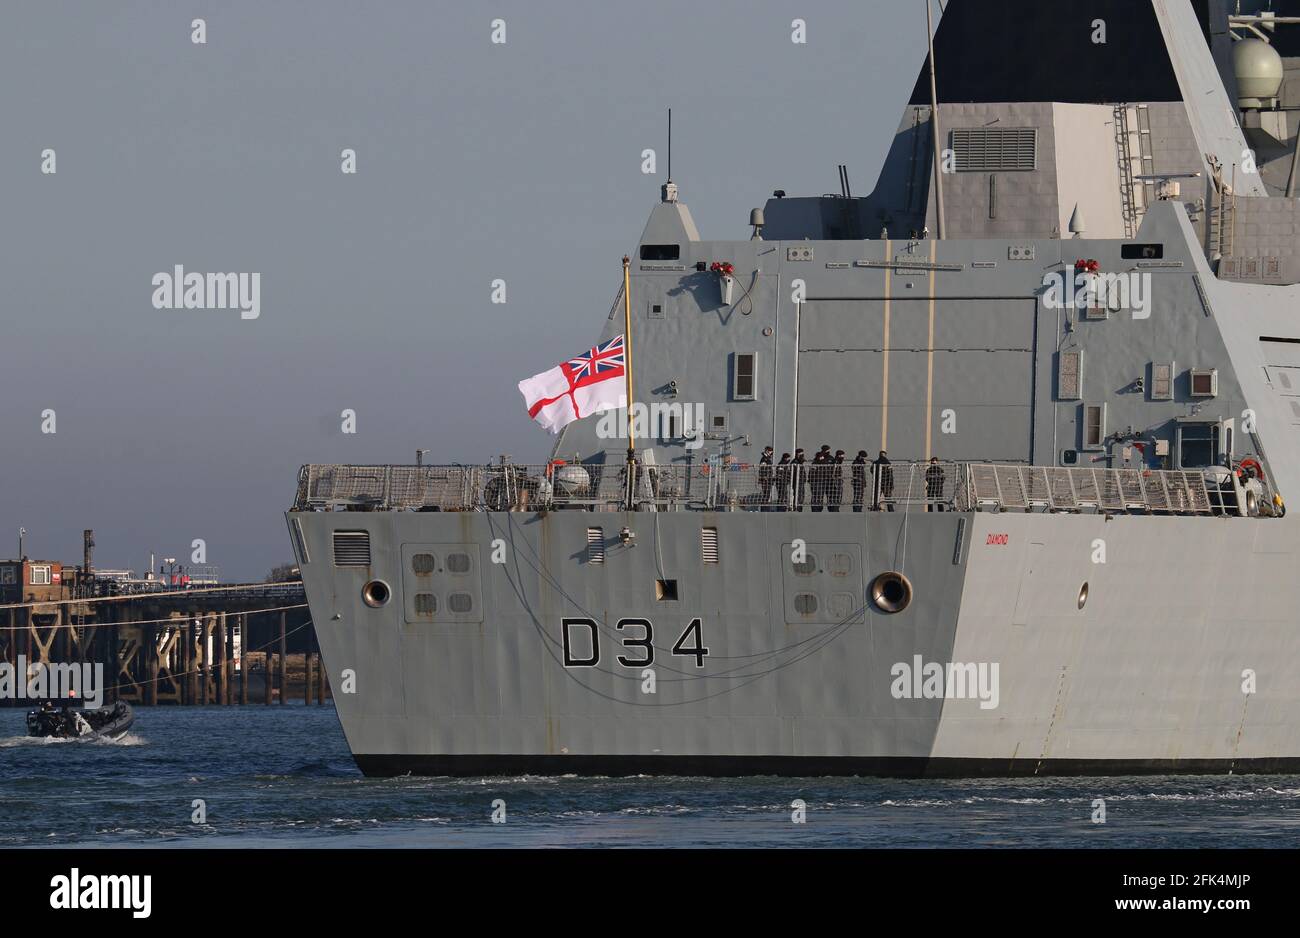 The white ensign on the Royal Navy ship HMS DIAMOND flies at half mast marking the official period of mourning for Prince Philip, Duke of Edinburgh Stock Photo